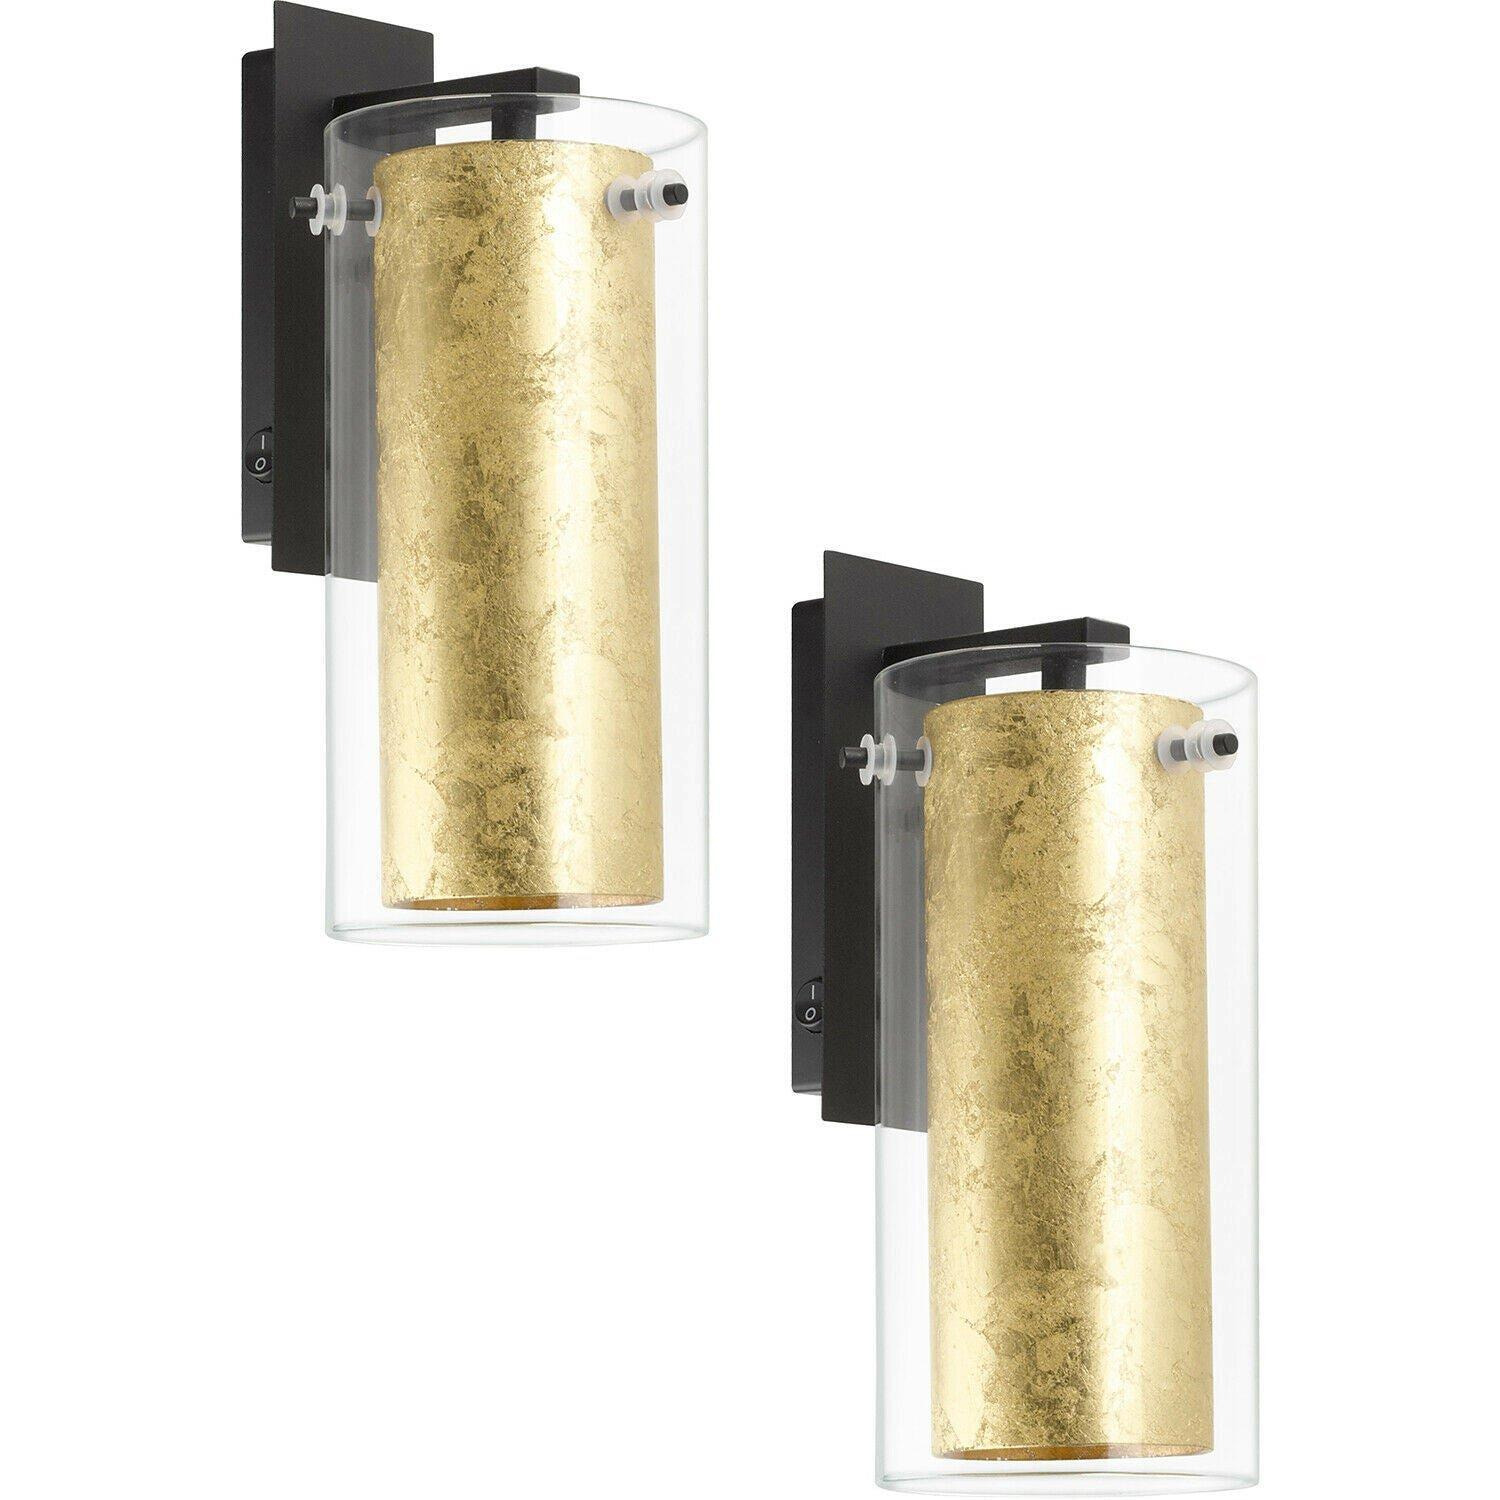 2 PACK Wall Light Colour Black Back Plate Shade Gold Inner Clear Glass E27 40W - image 1